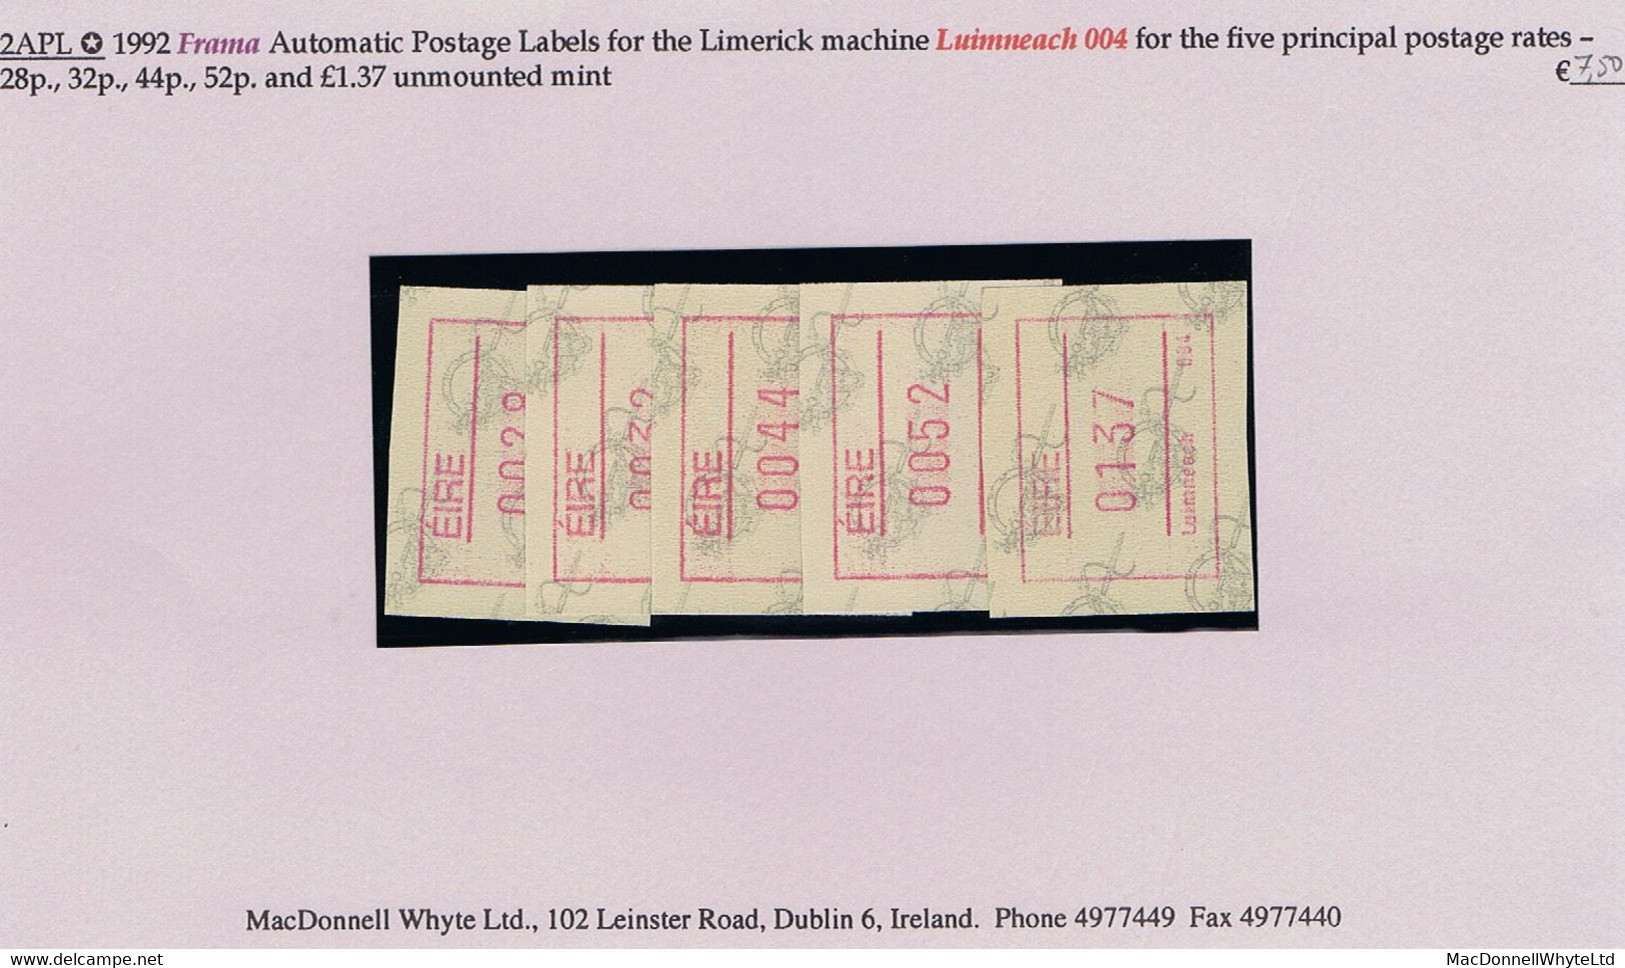 Ireland 1992 Frama Automatic Postage Labels For Limerick 004 Machine For Five Rates 28p, 32p, 44p, 52p, £1.37 Mint - Automatenmarken (Frama)